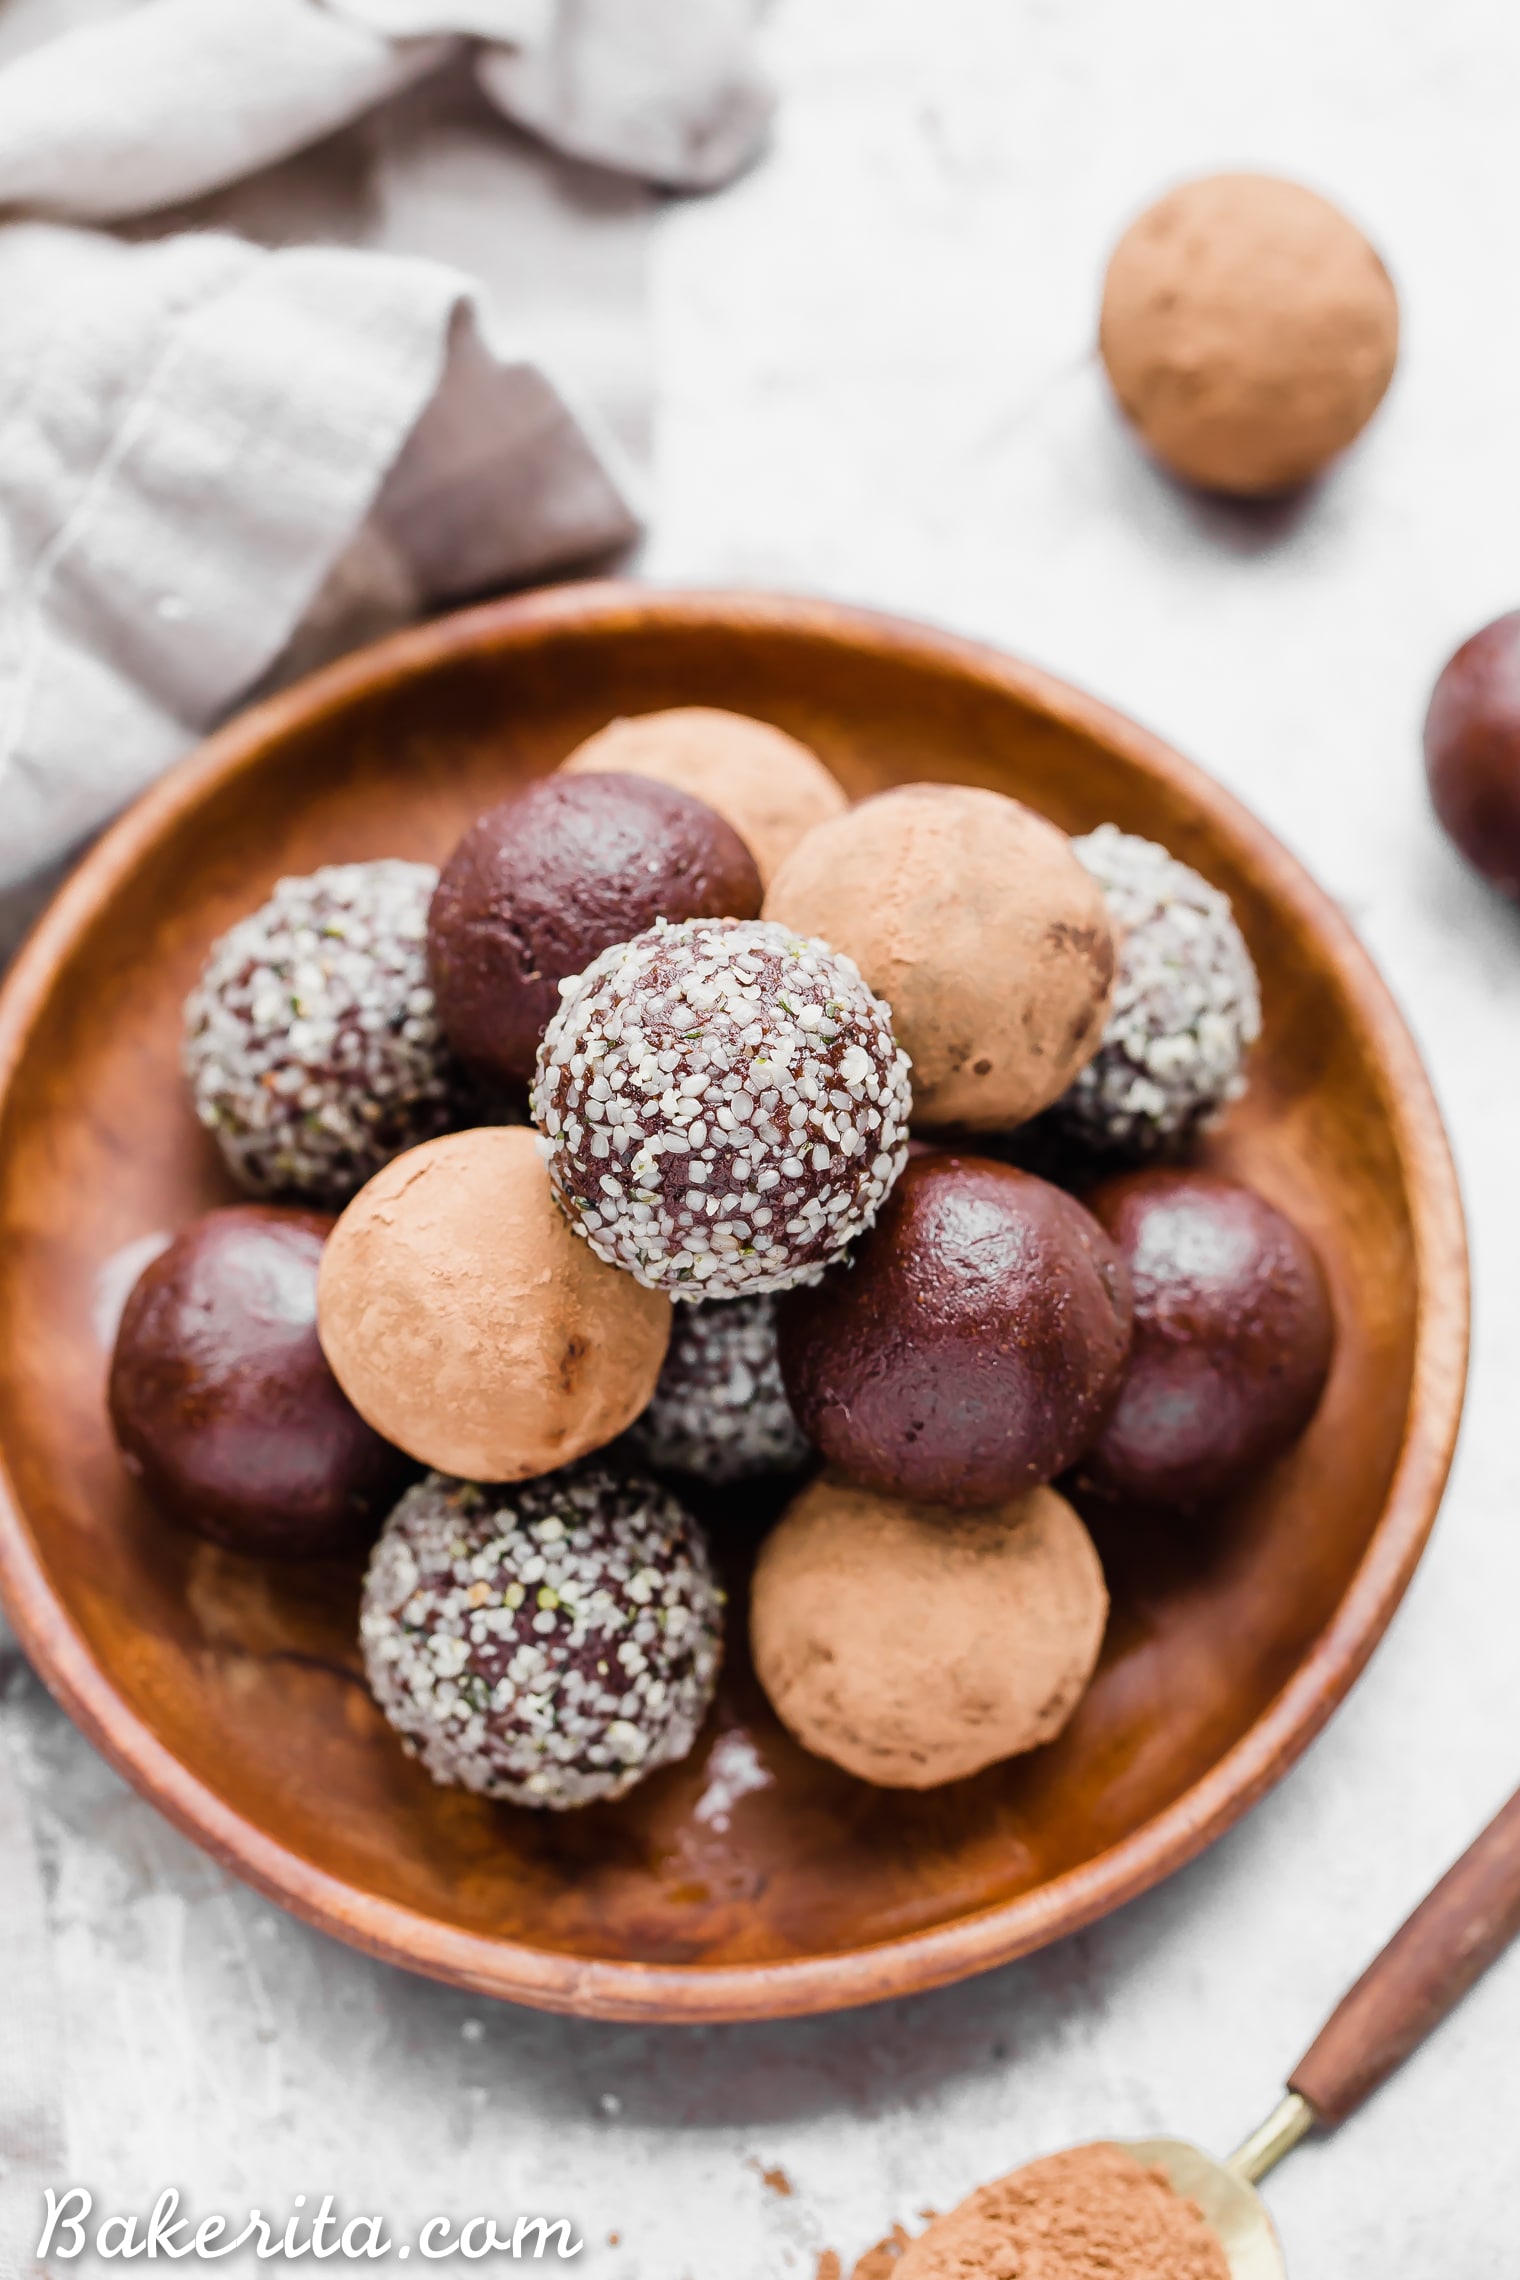 These Raw Chocolate Truffles will satisfy your chocolate candy cravings, guilt-free! These raw, date-sweetened truffles are easy to make in your blender or food processor, and they're gluten-free, paleo, and vegan.